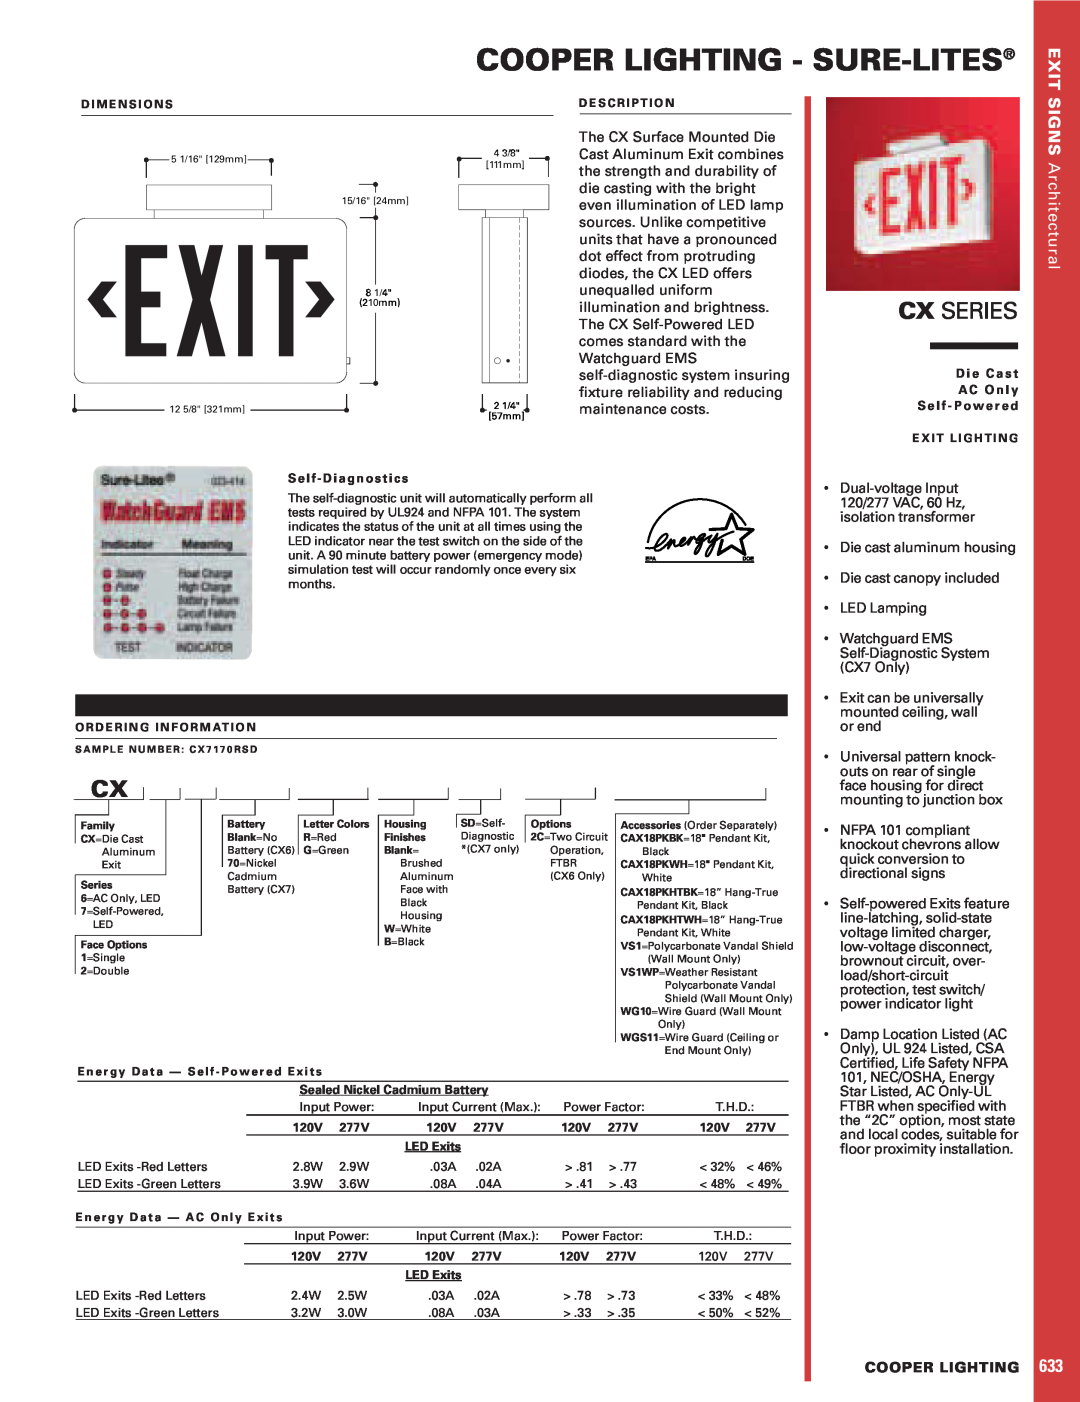 Cooper Lighting CX Series dimensions Cooper Lighting - Sure-Lites, Cx Series, Exit, SIGNS Architectural 